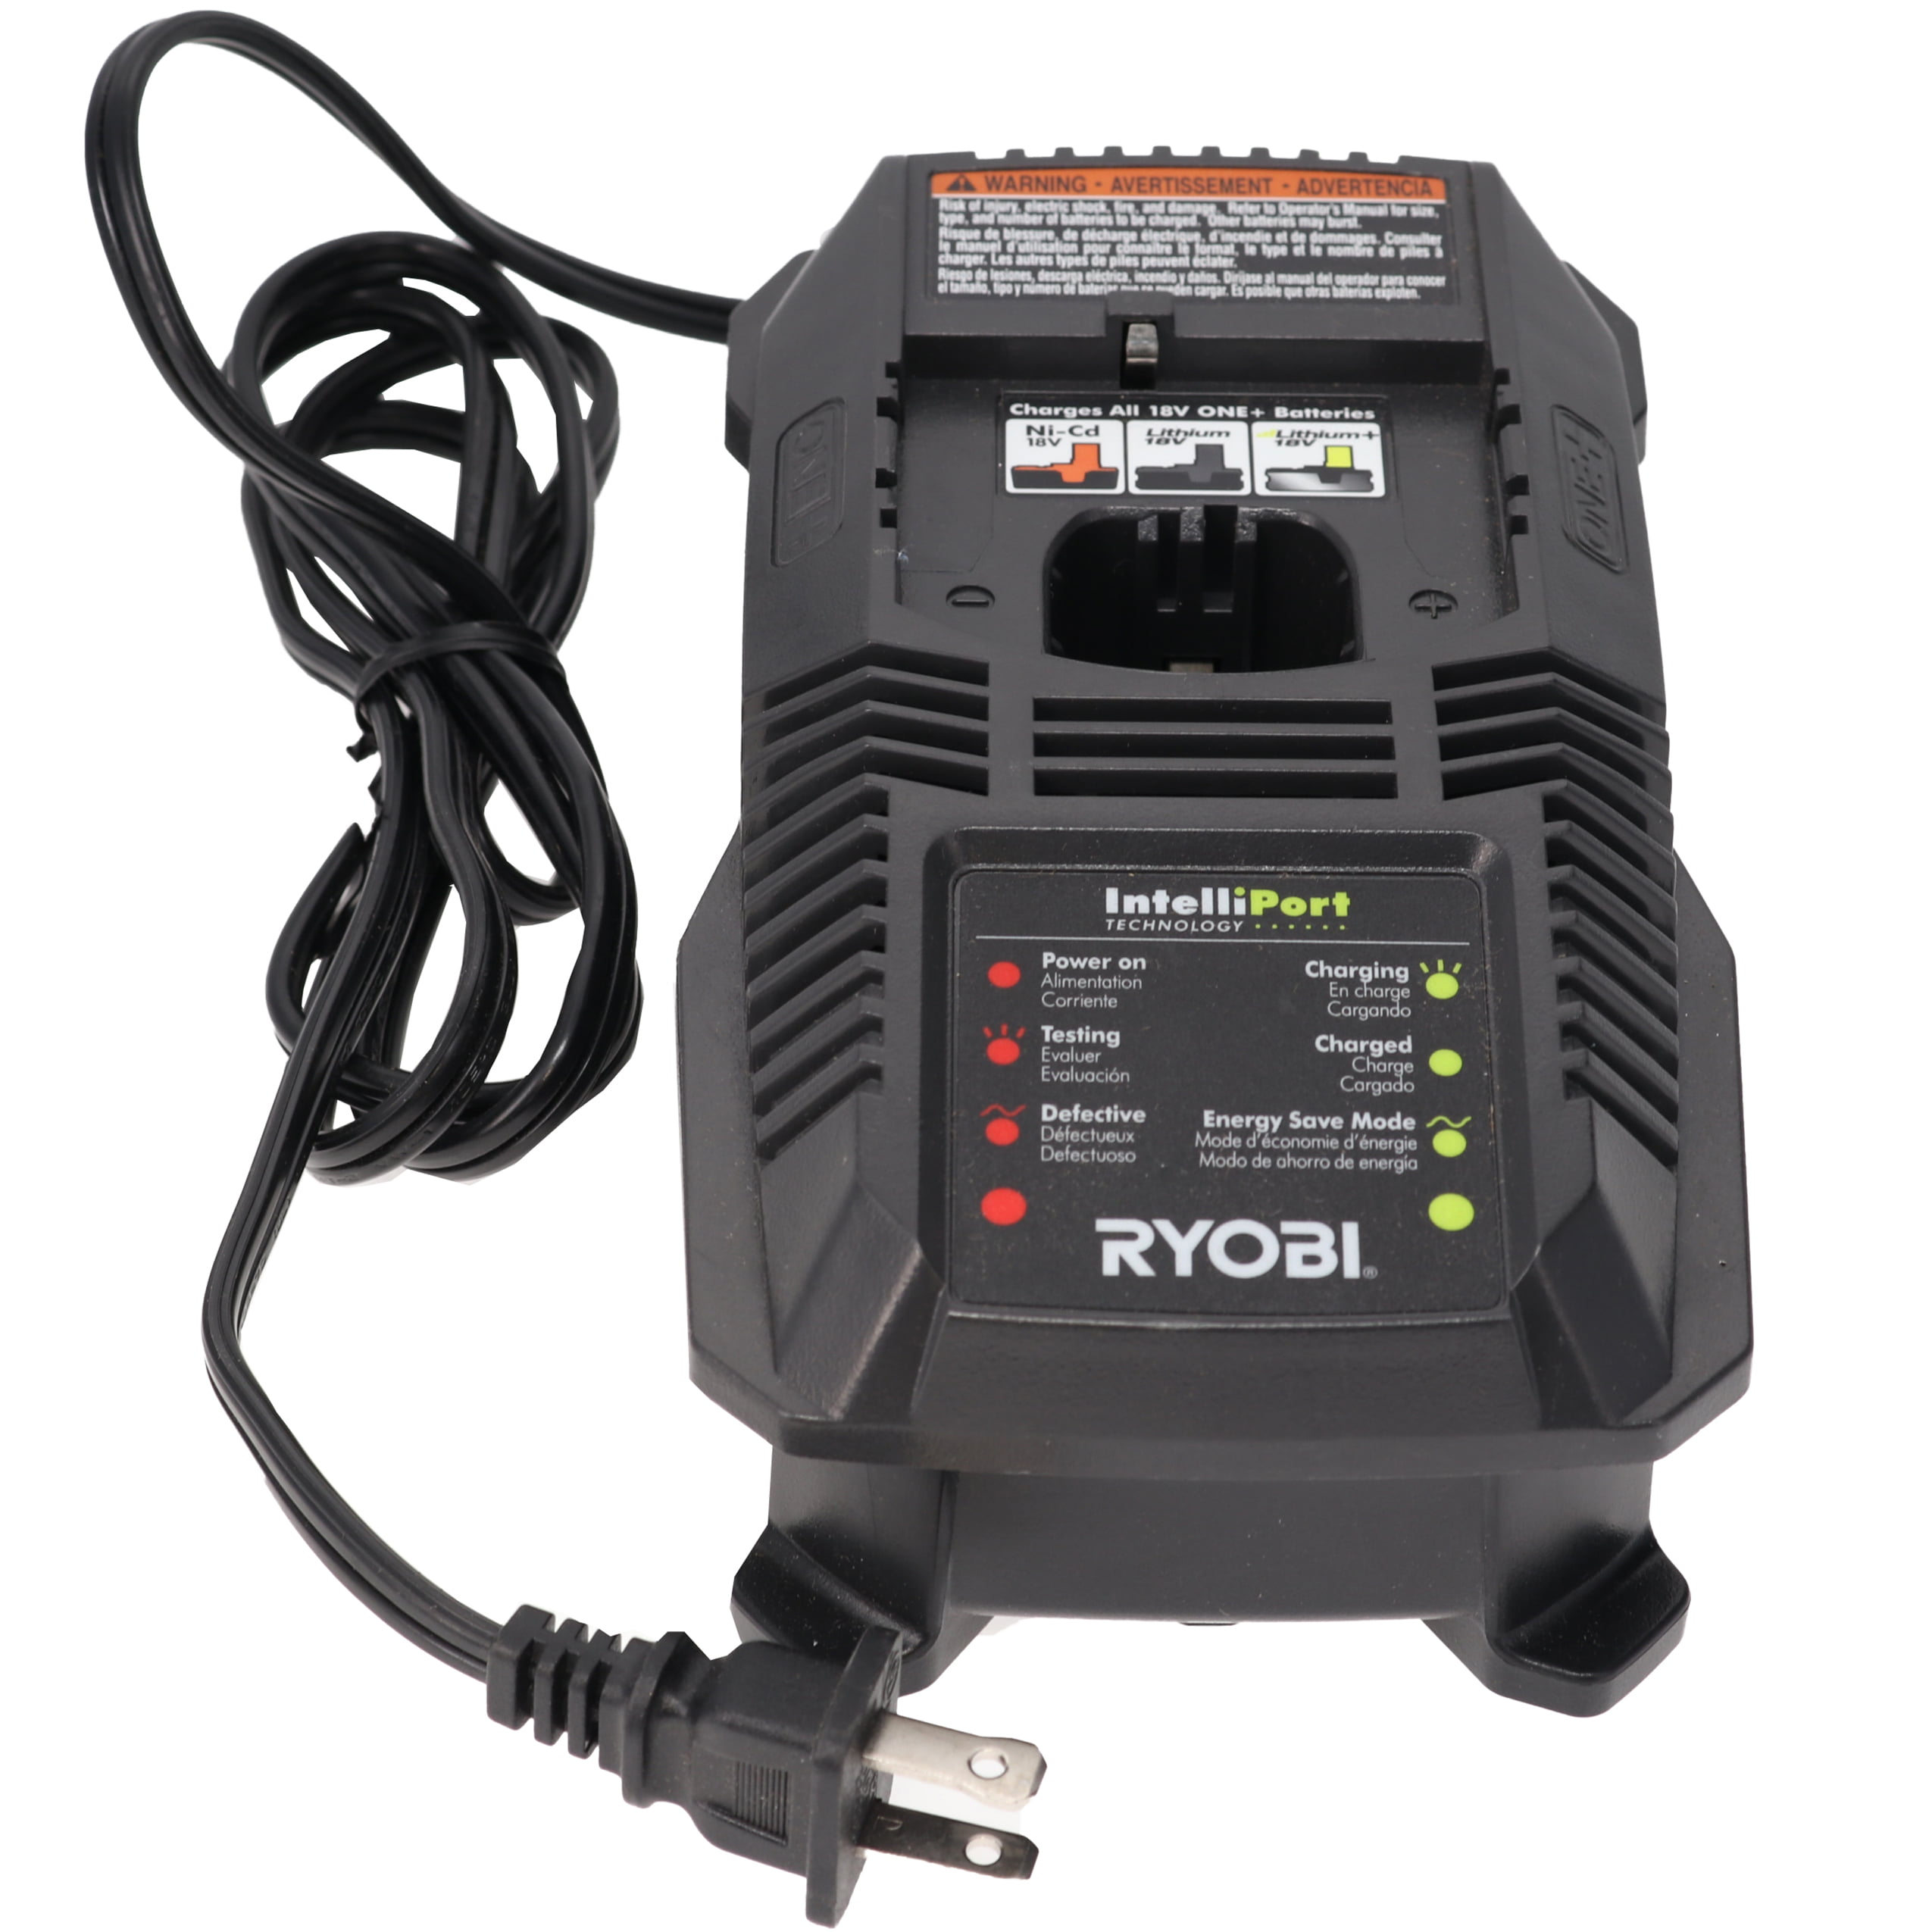 18V IntelliPort Battery Charger for sale online Ryobi P118 Lithium-ion/Ni-Cad ONE 